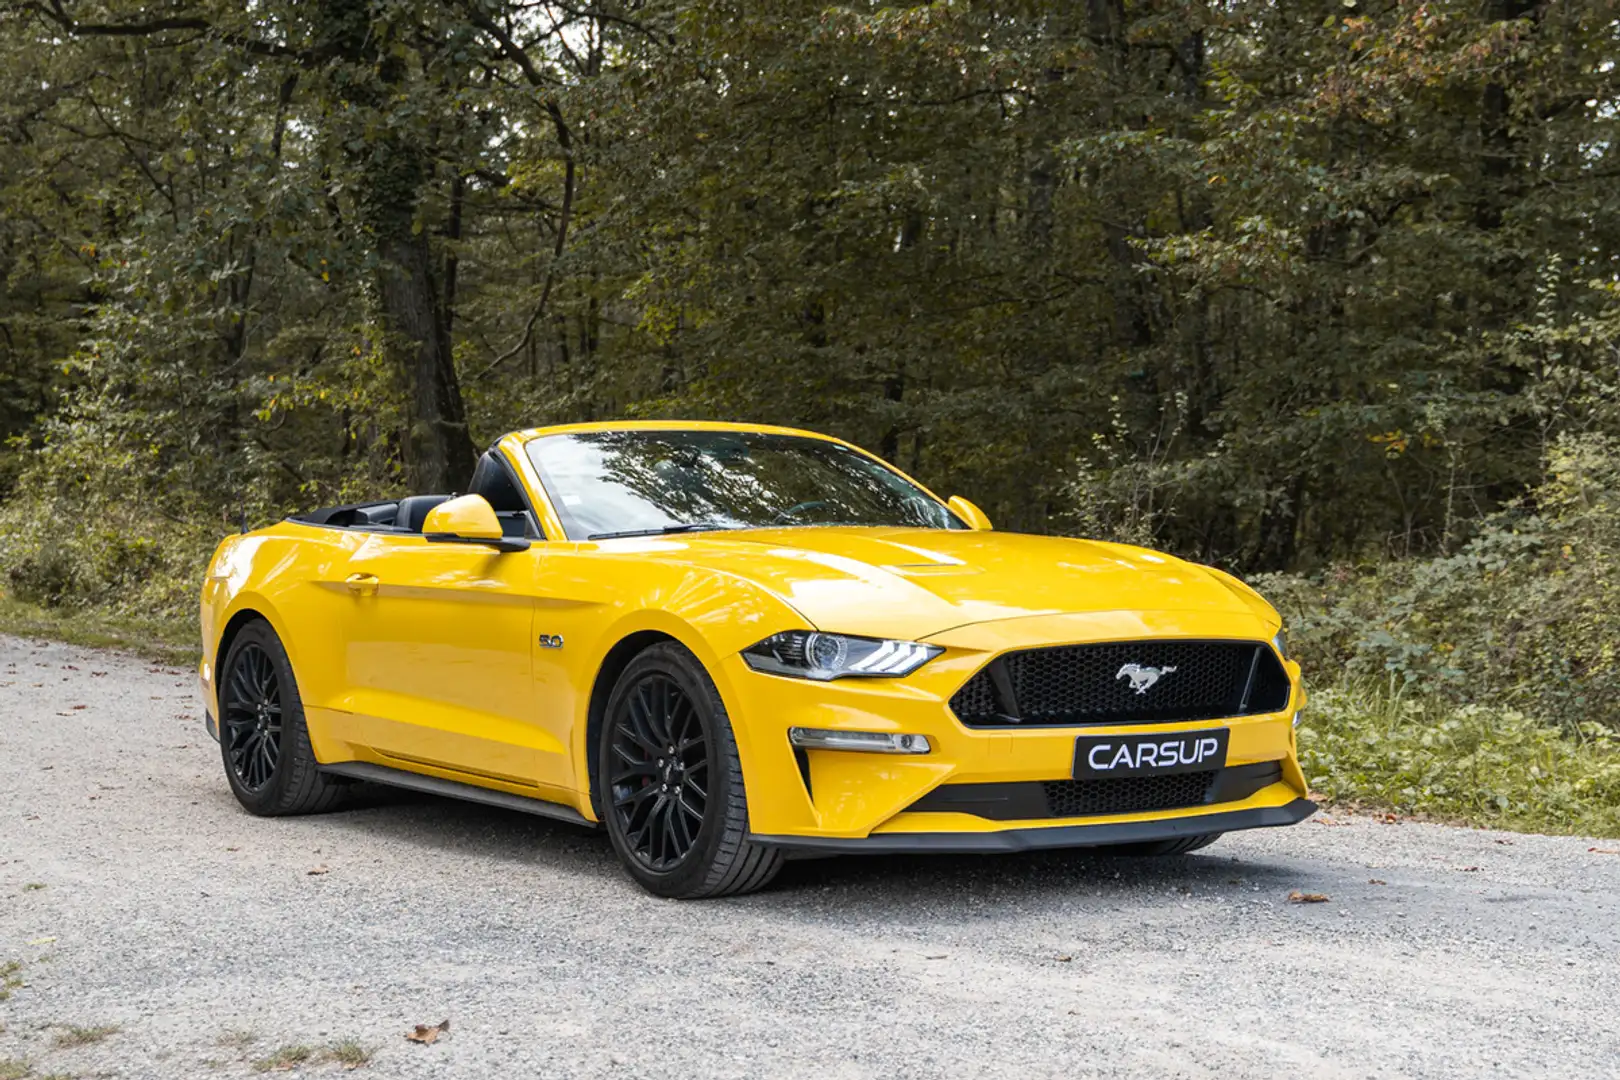 Ford Mustang Cabriolet V8 5.0 450 ch - 12 900km - 2018 - Immat  Yellow - 1